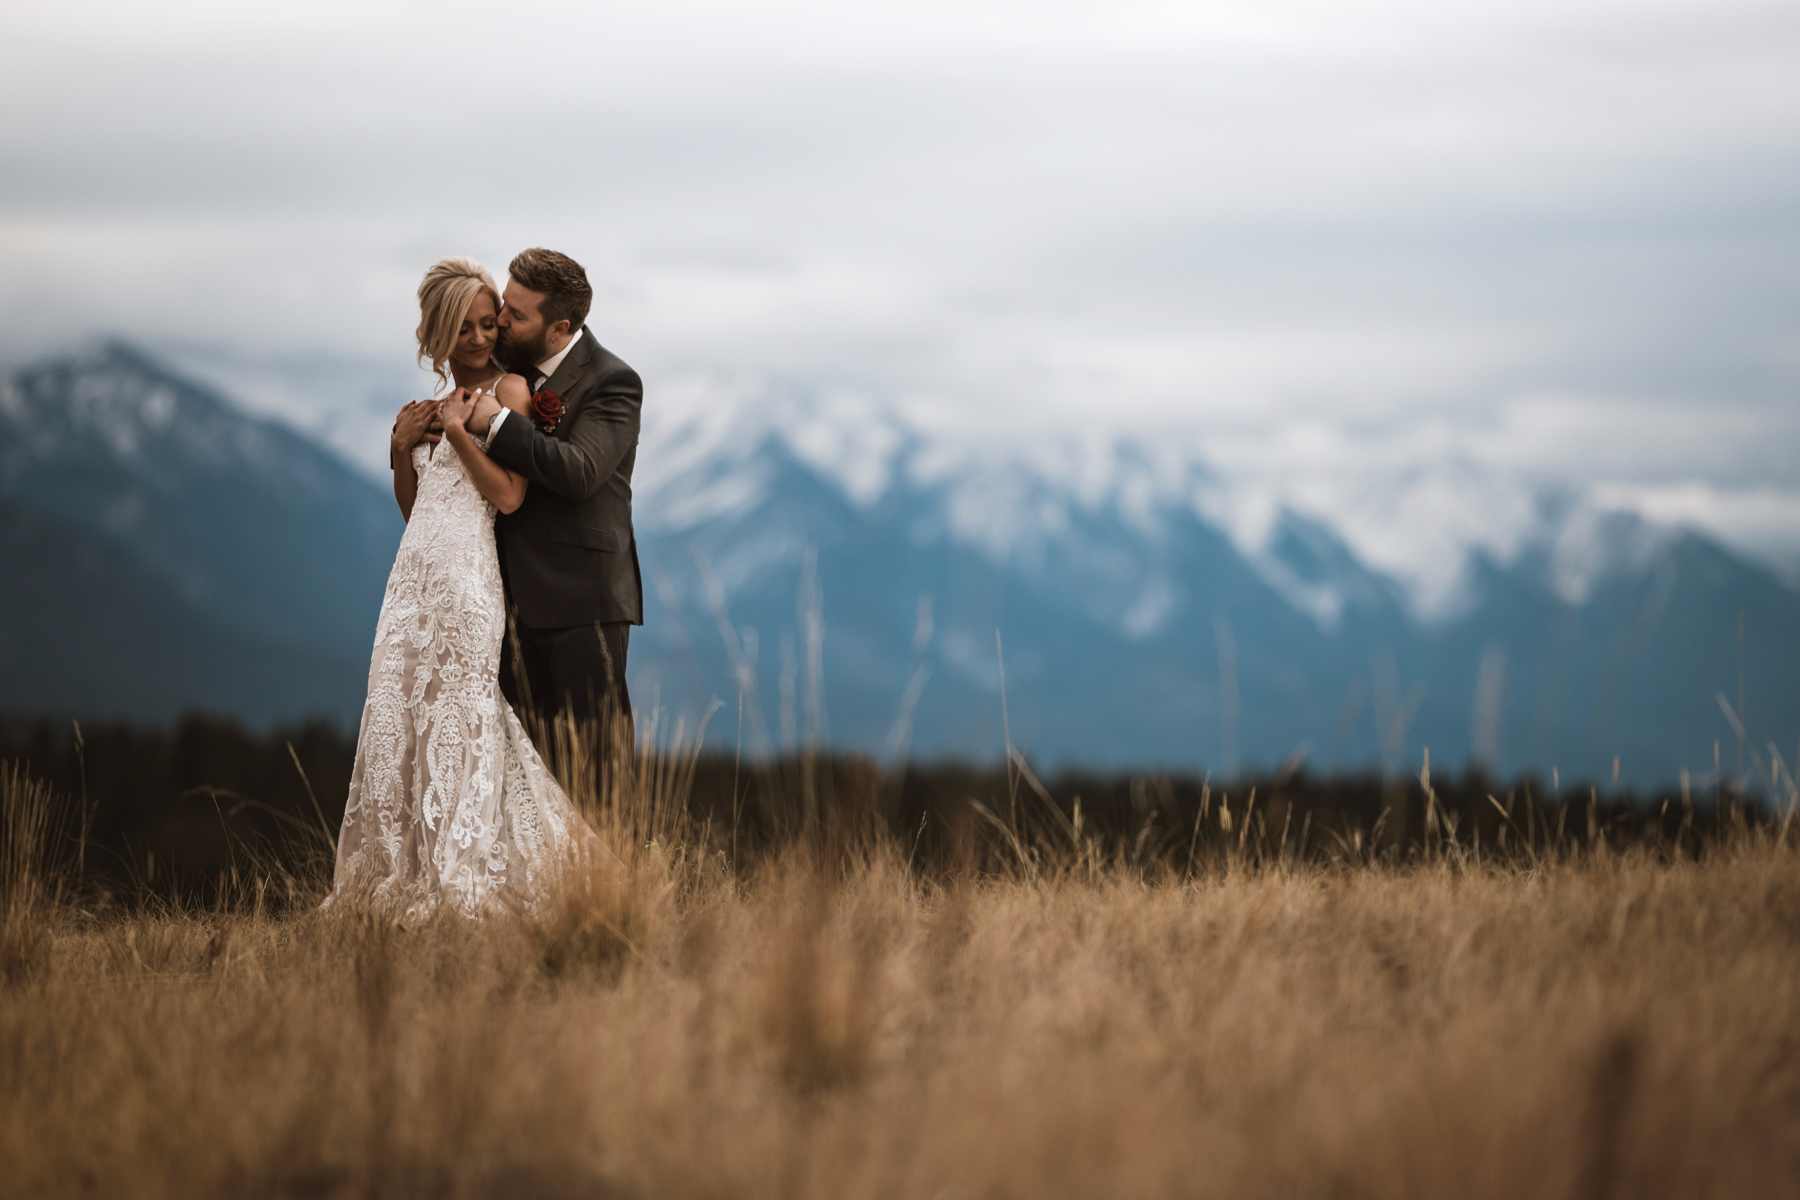 Calgary wedding photographer in Invermere for adventurous mountain destination elopement at Eagle Ranch Golf Resort, British Columbia - Image 22